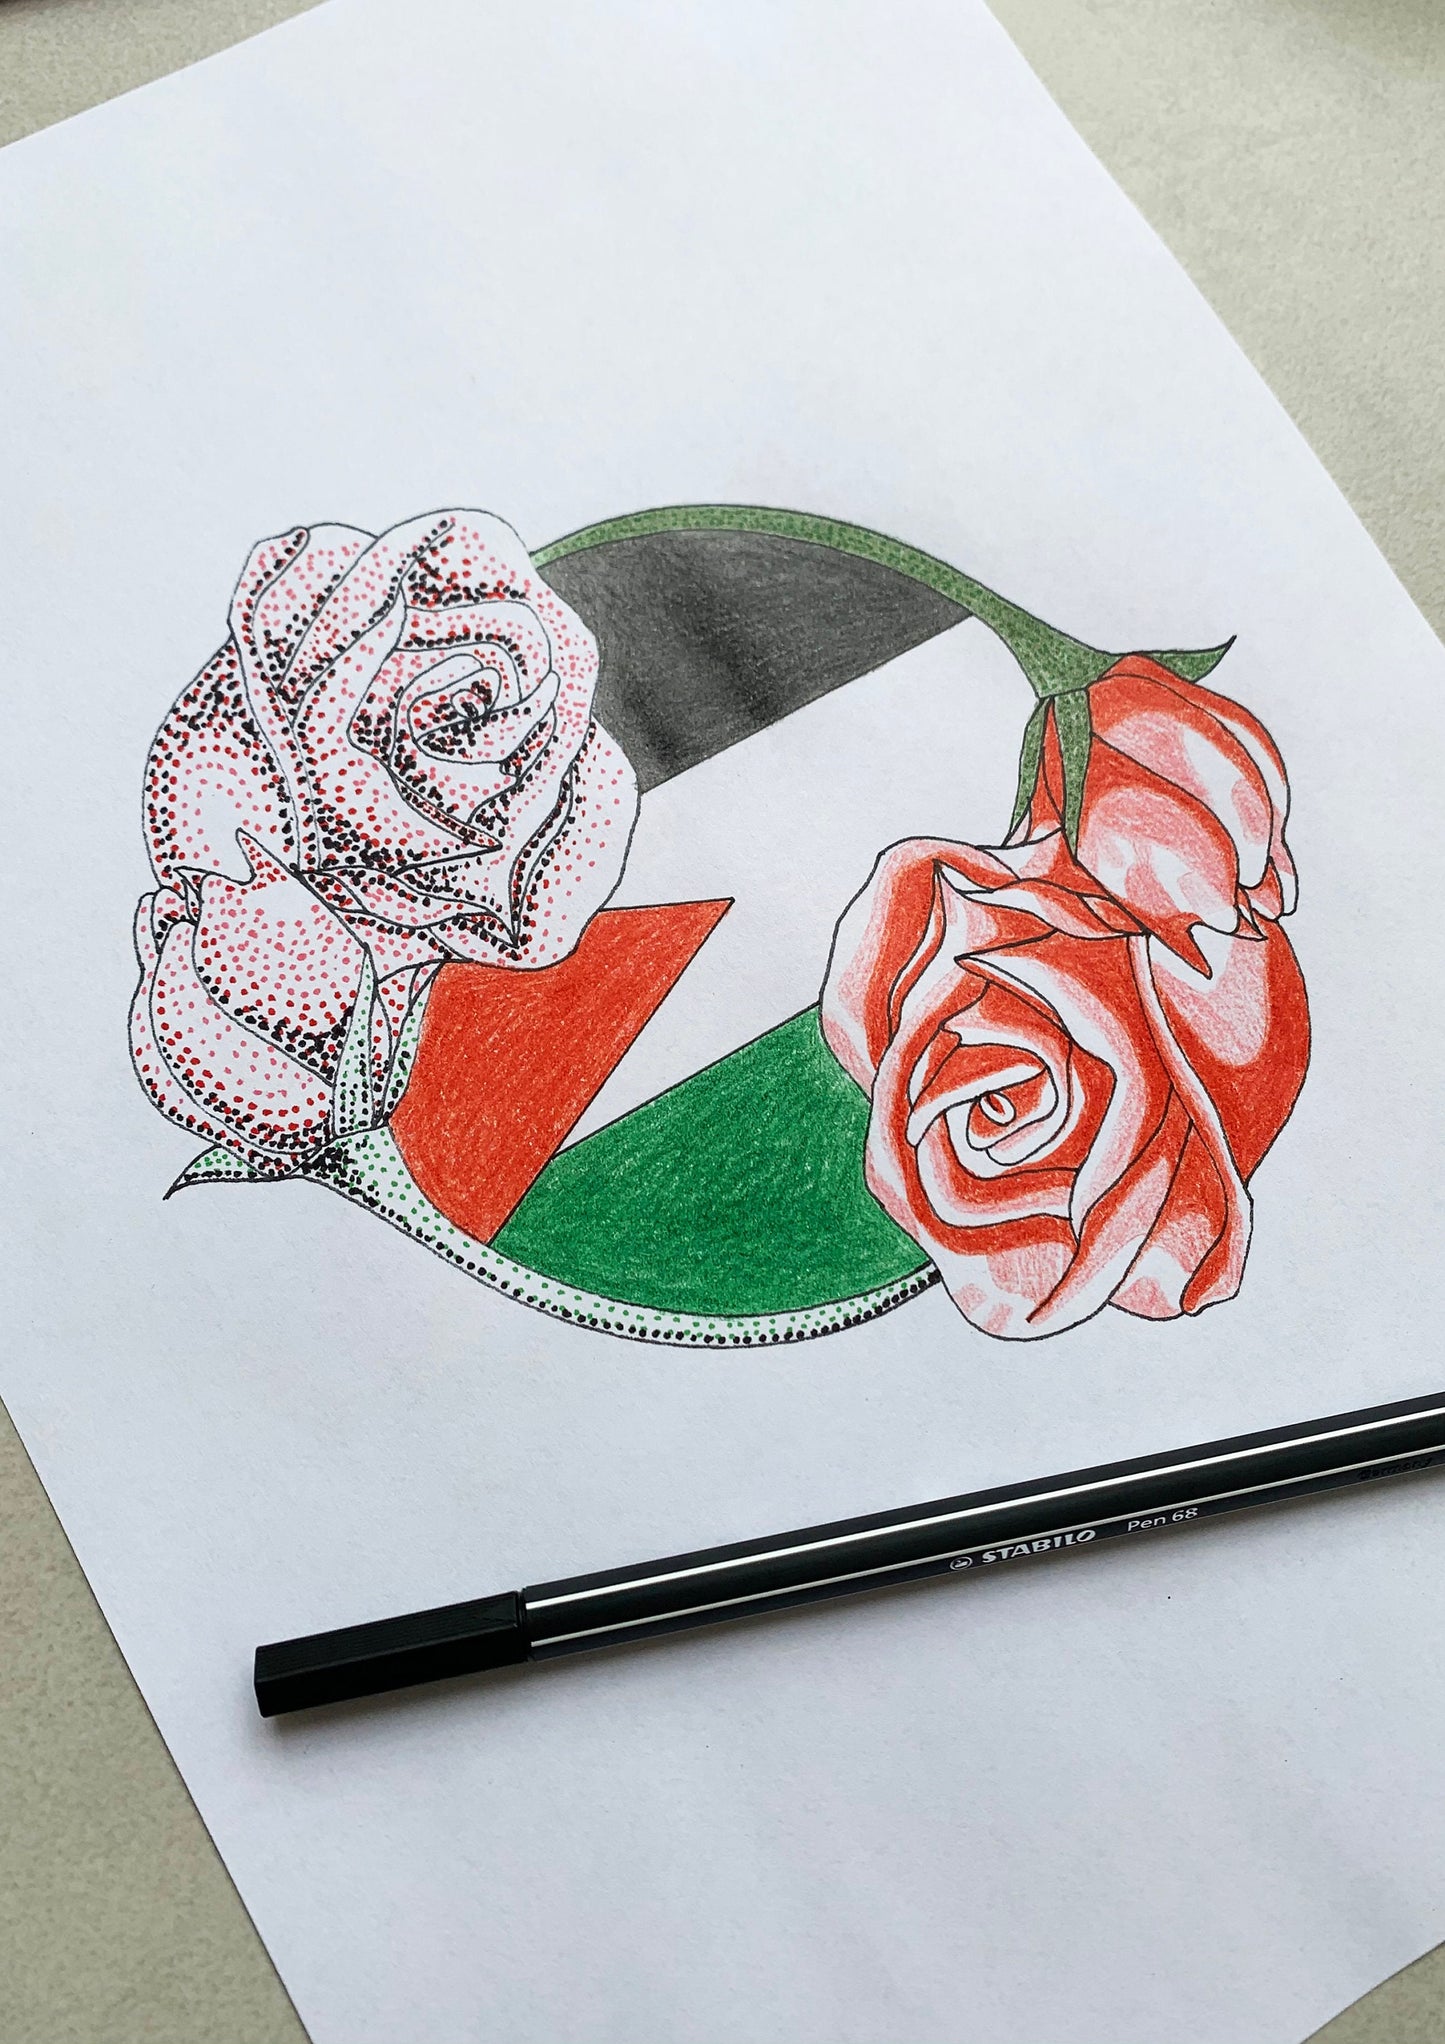 Cycle of Growth - Free Palestine Colouring Sheet